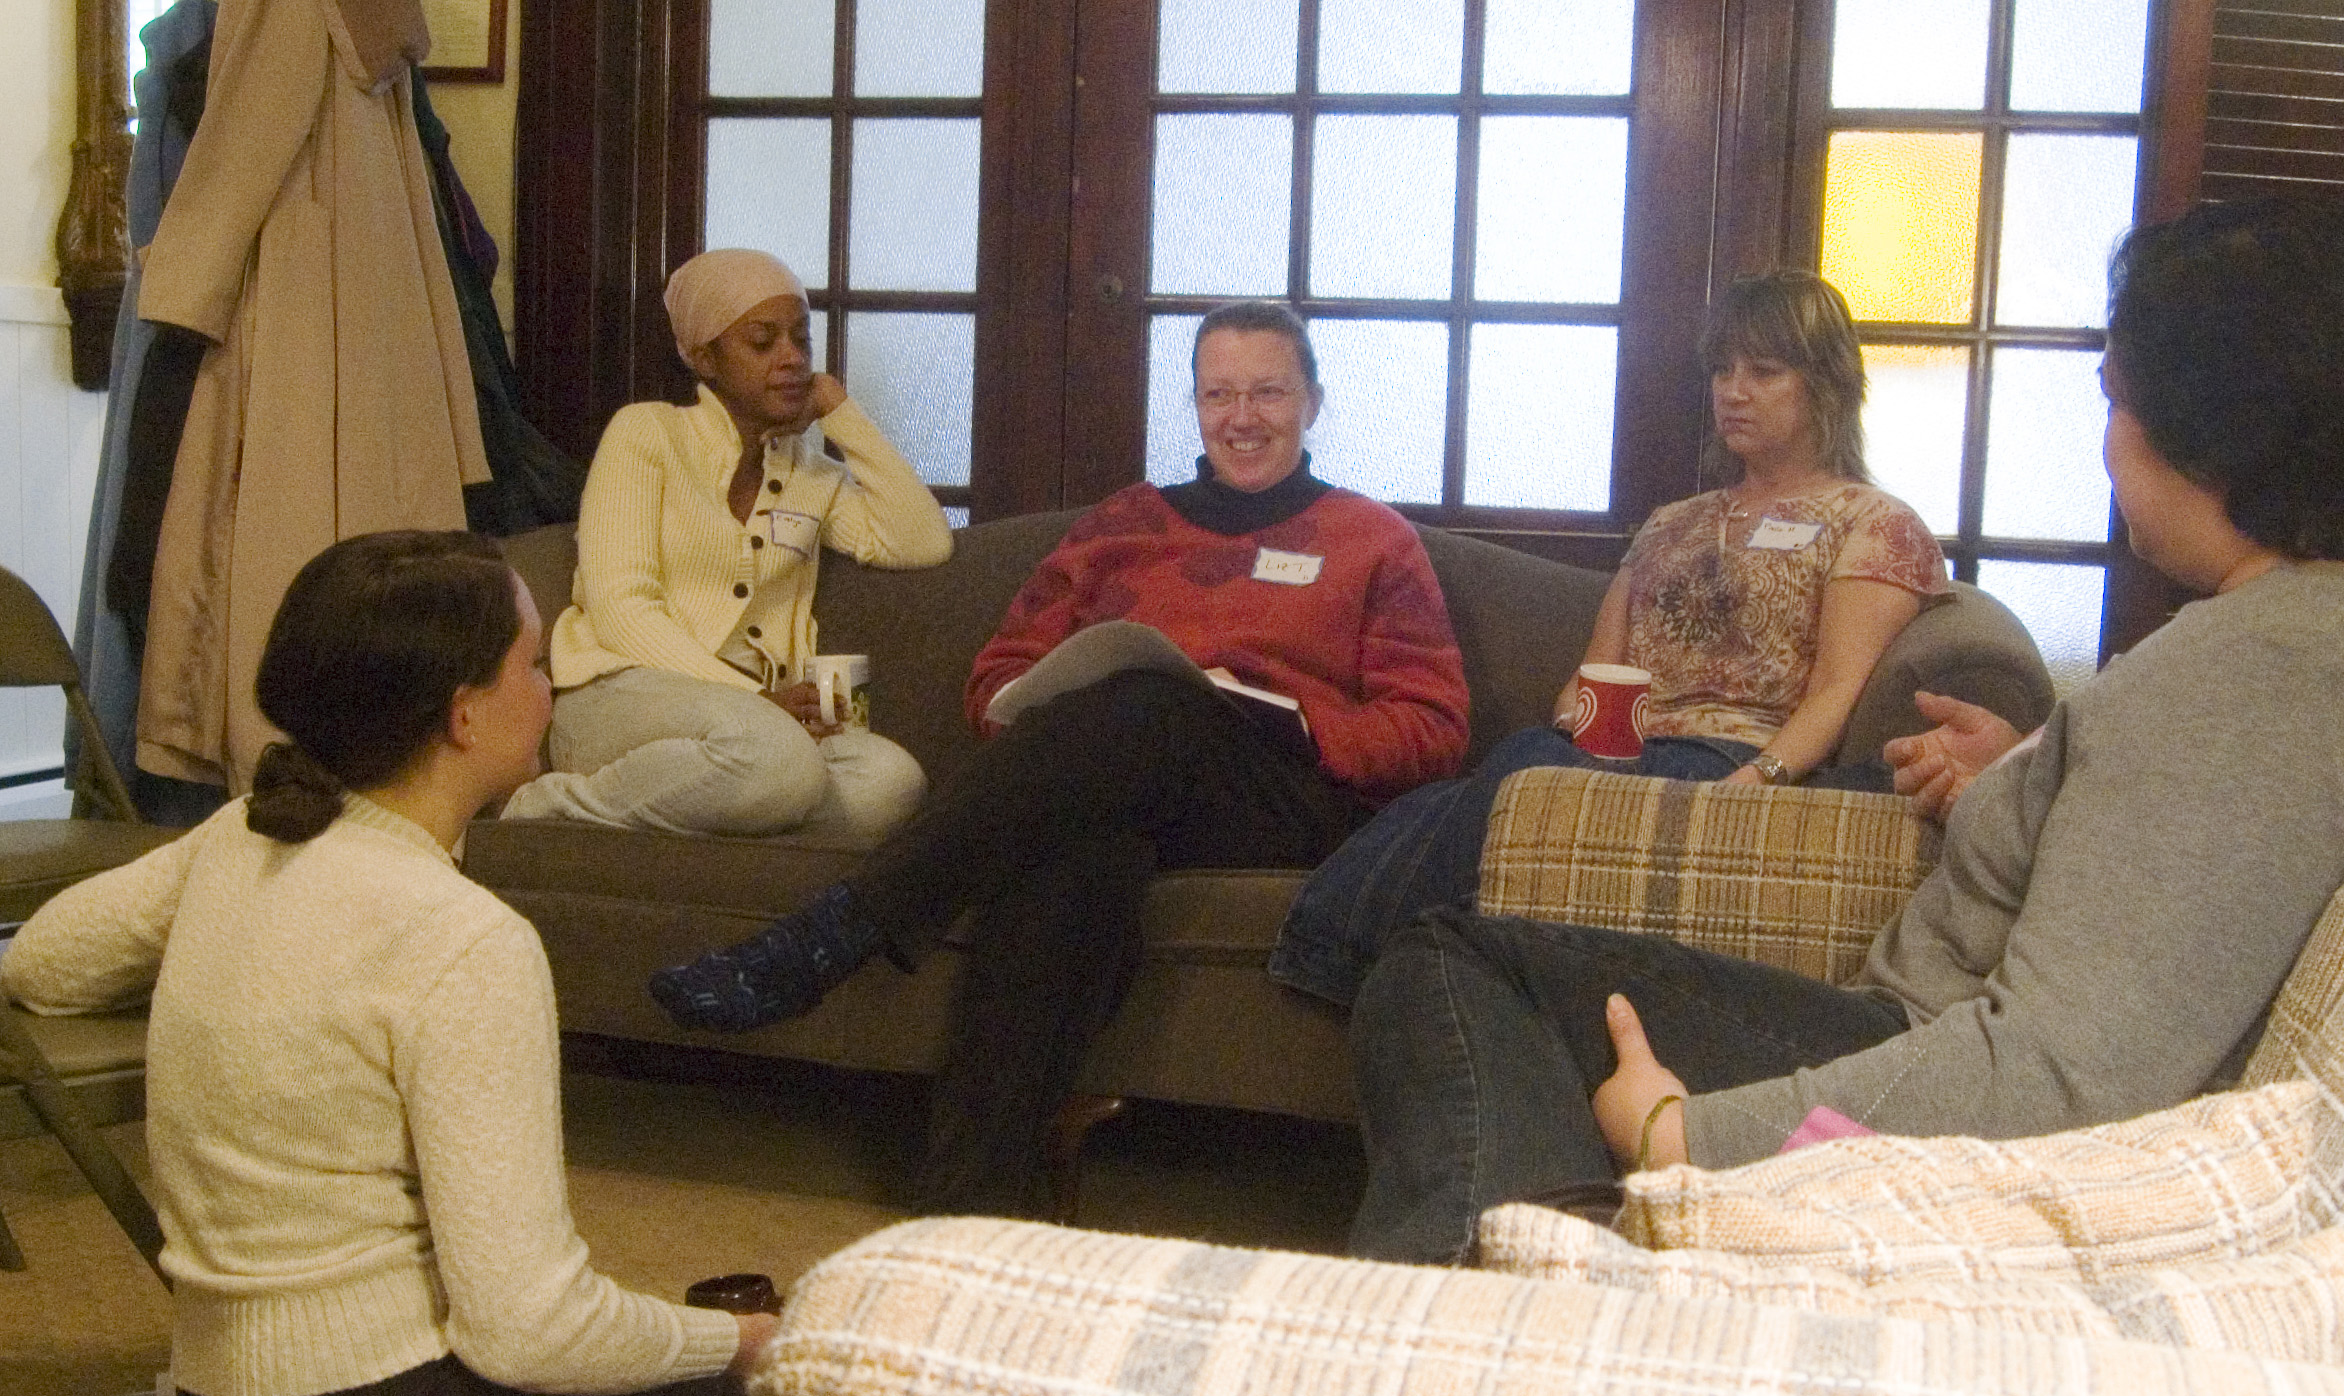 several people gathered together in a living room